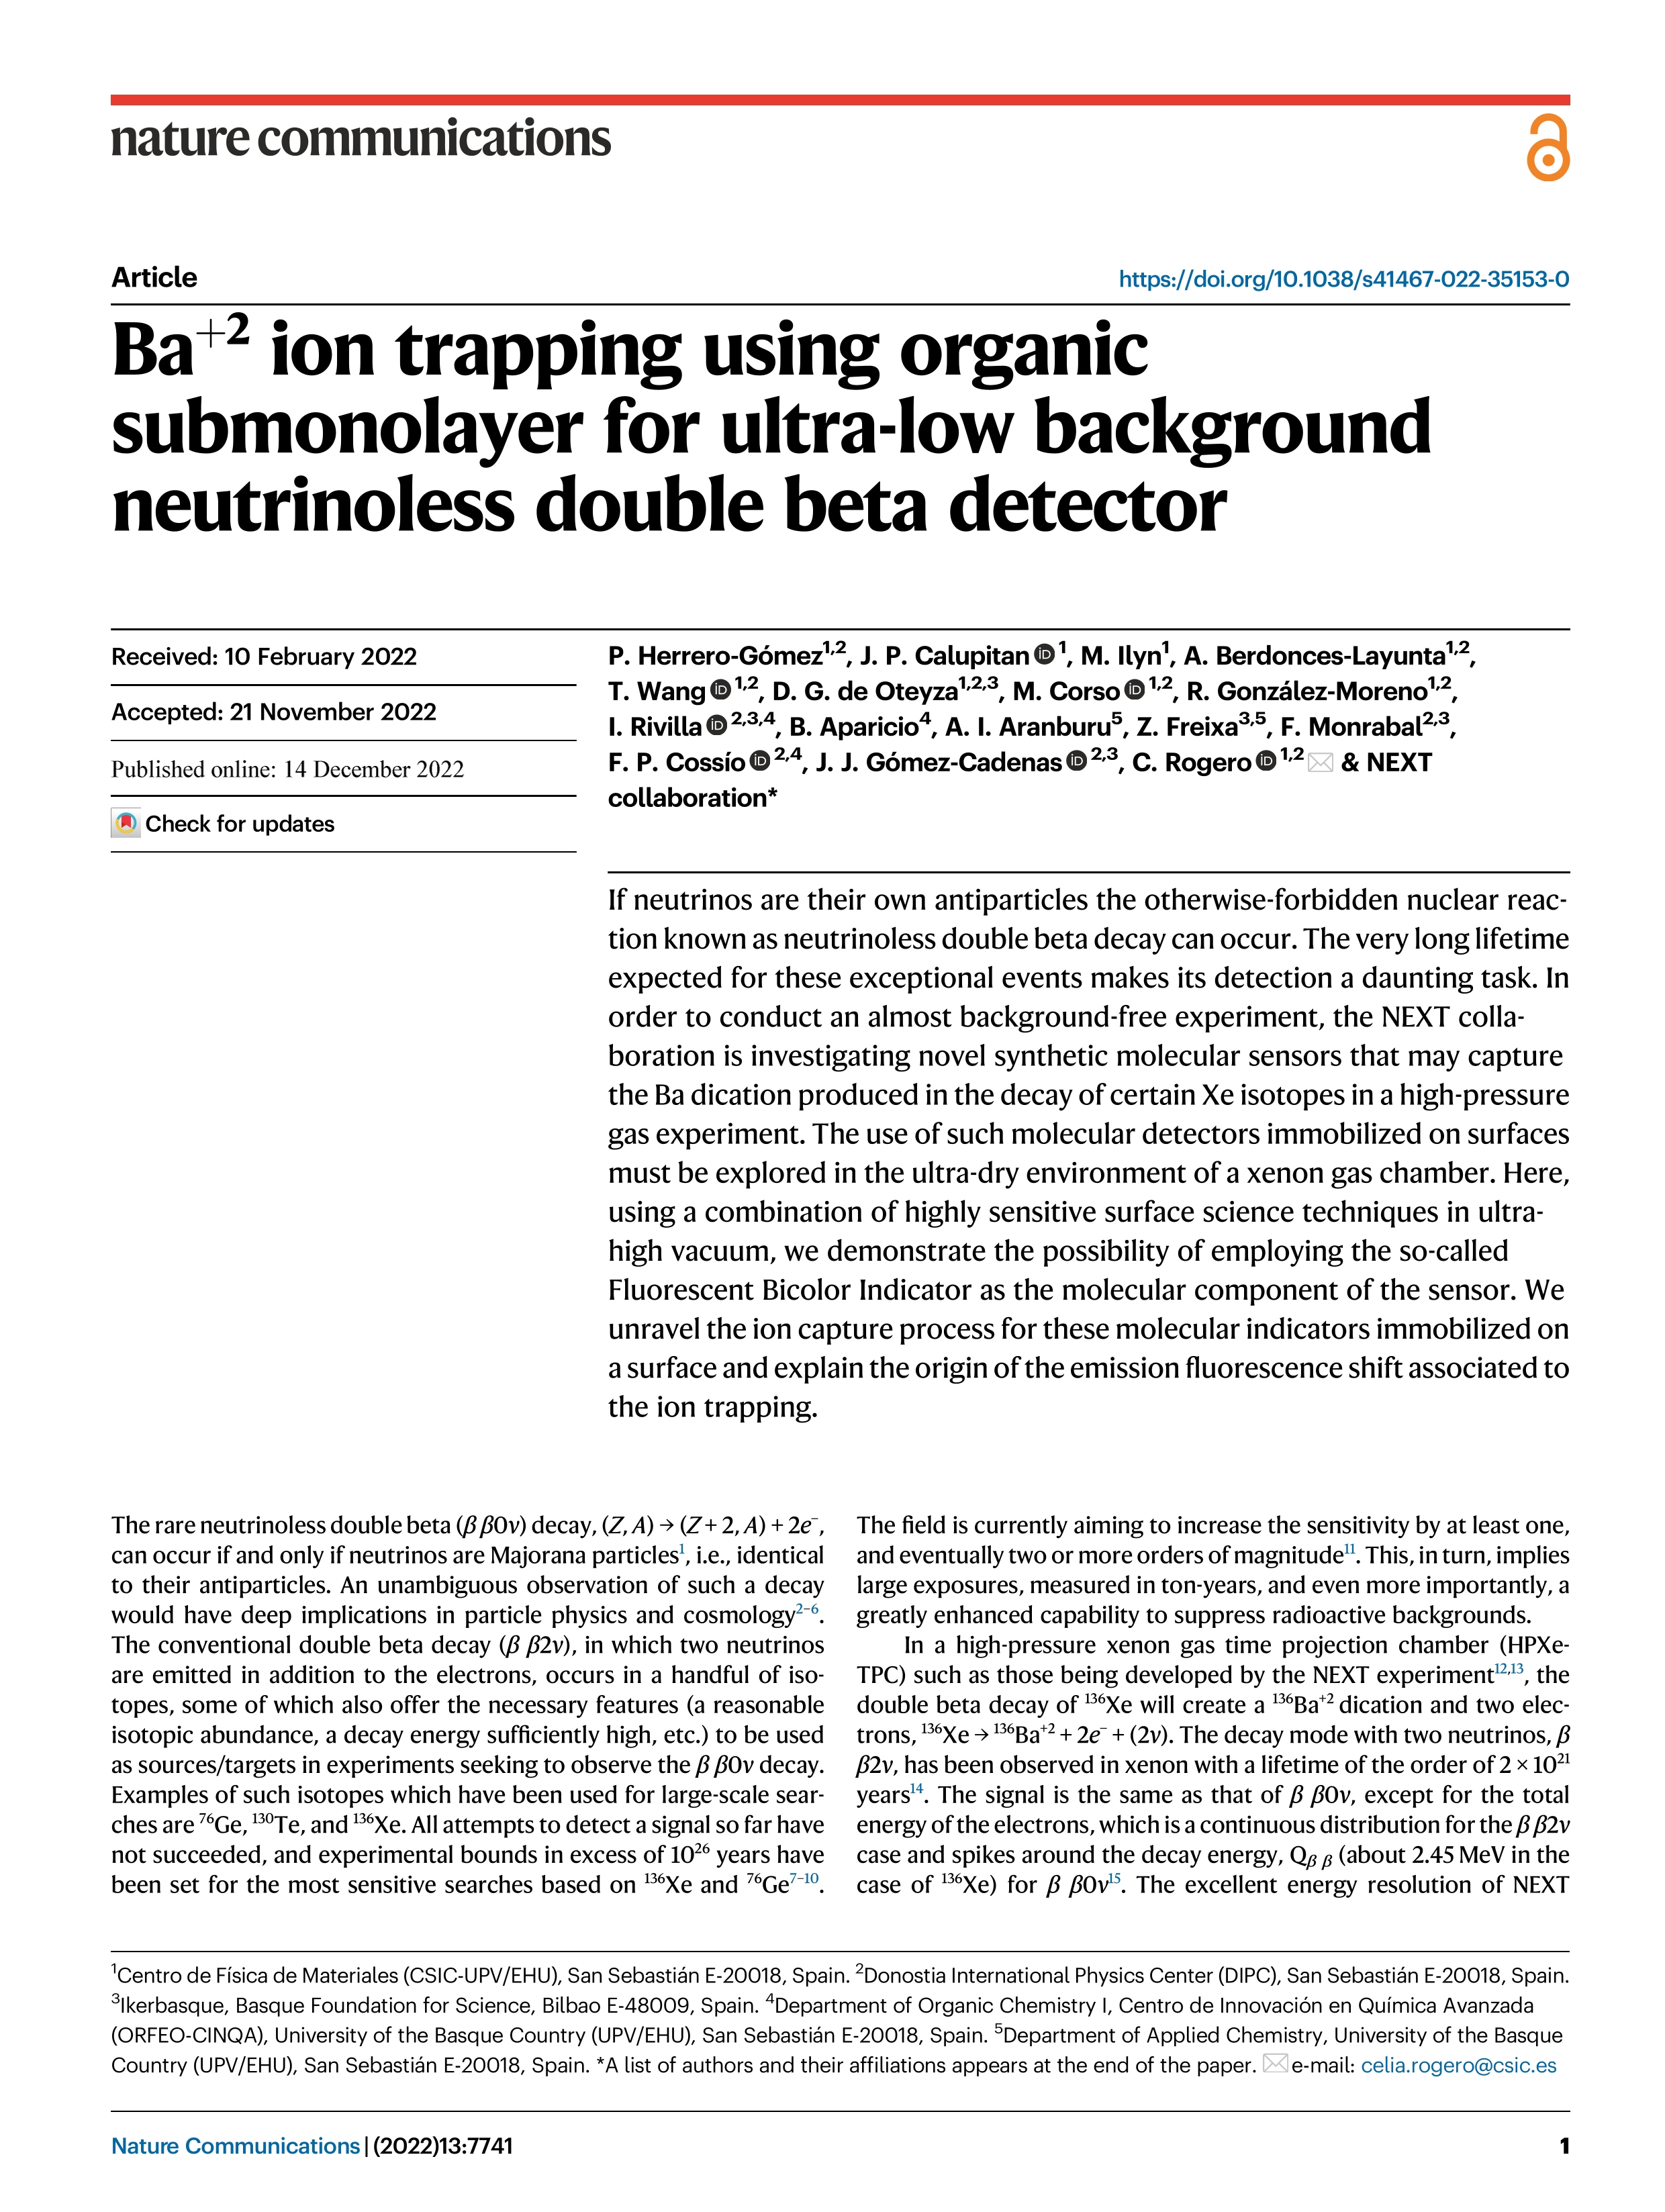 Ba+2 ion trapping using organic submonolayer for ultra-low background neutrinoless double beta detector